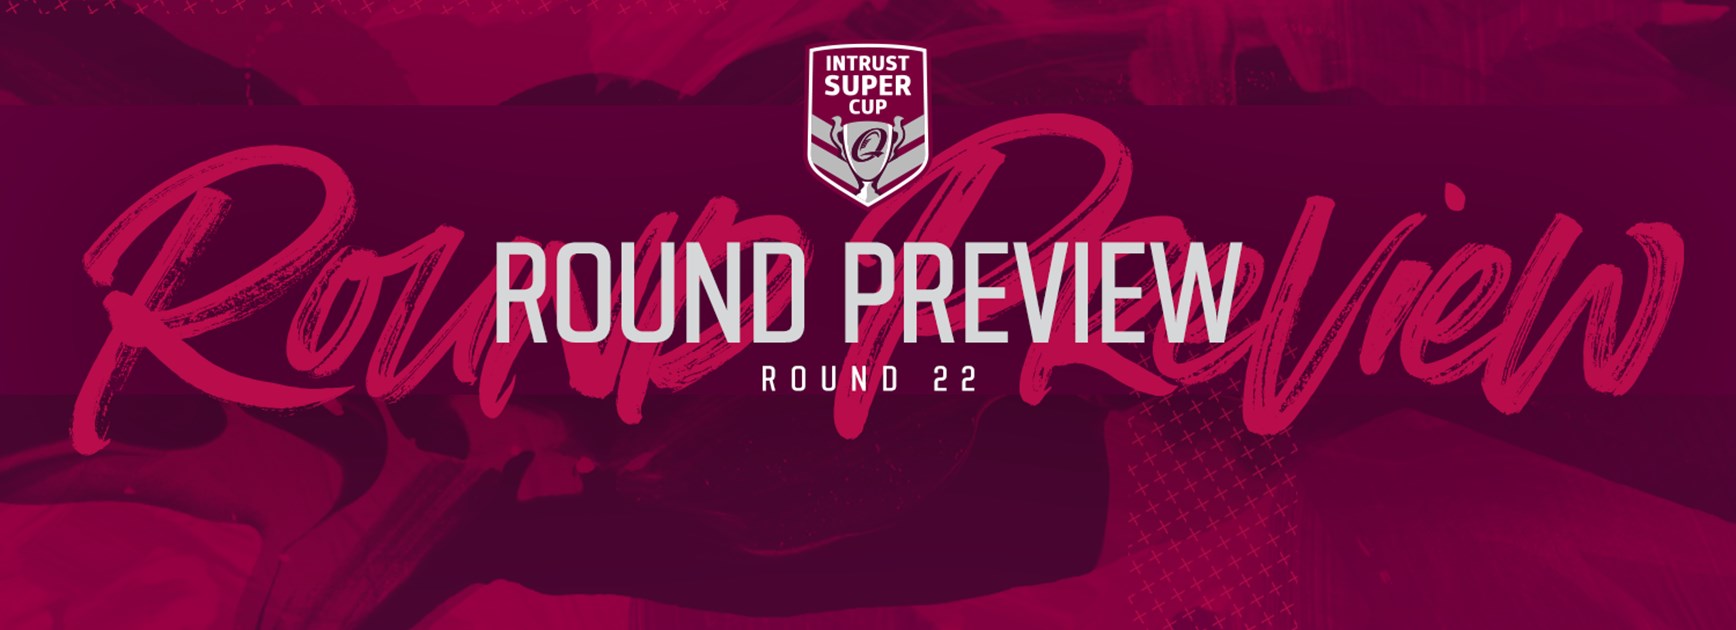 Intrust Super Cup Round 22 preview